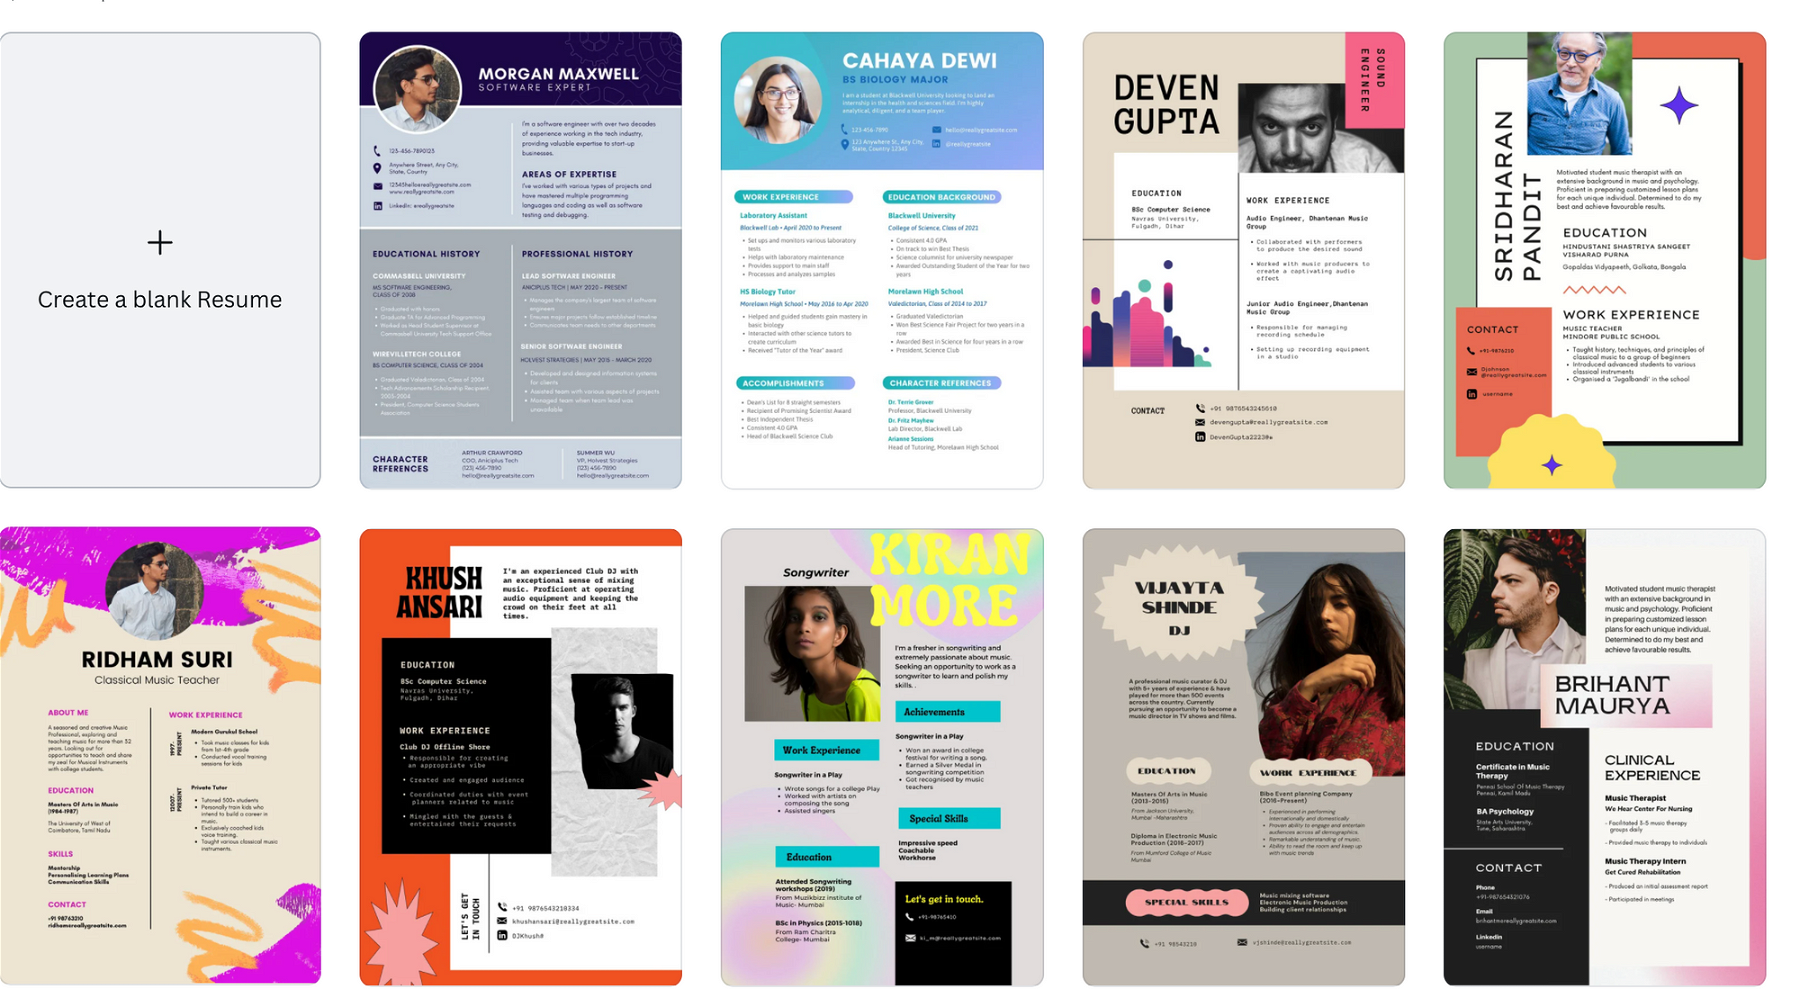 These templates have a good amalgamation of good design, fonts, and creative ideas. These resumes are easily editable as well. https://www.canva.com/resumes/templates/